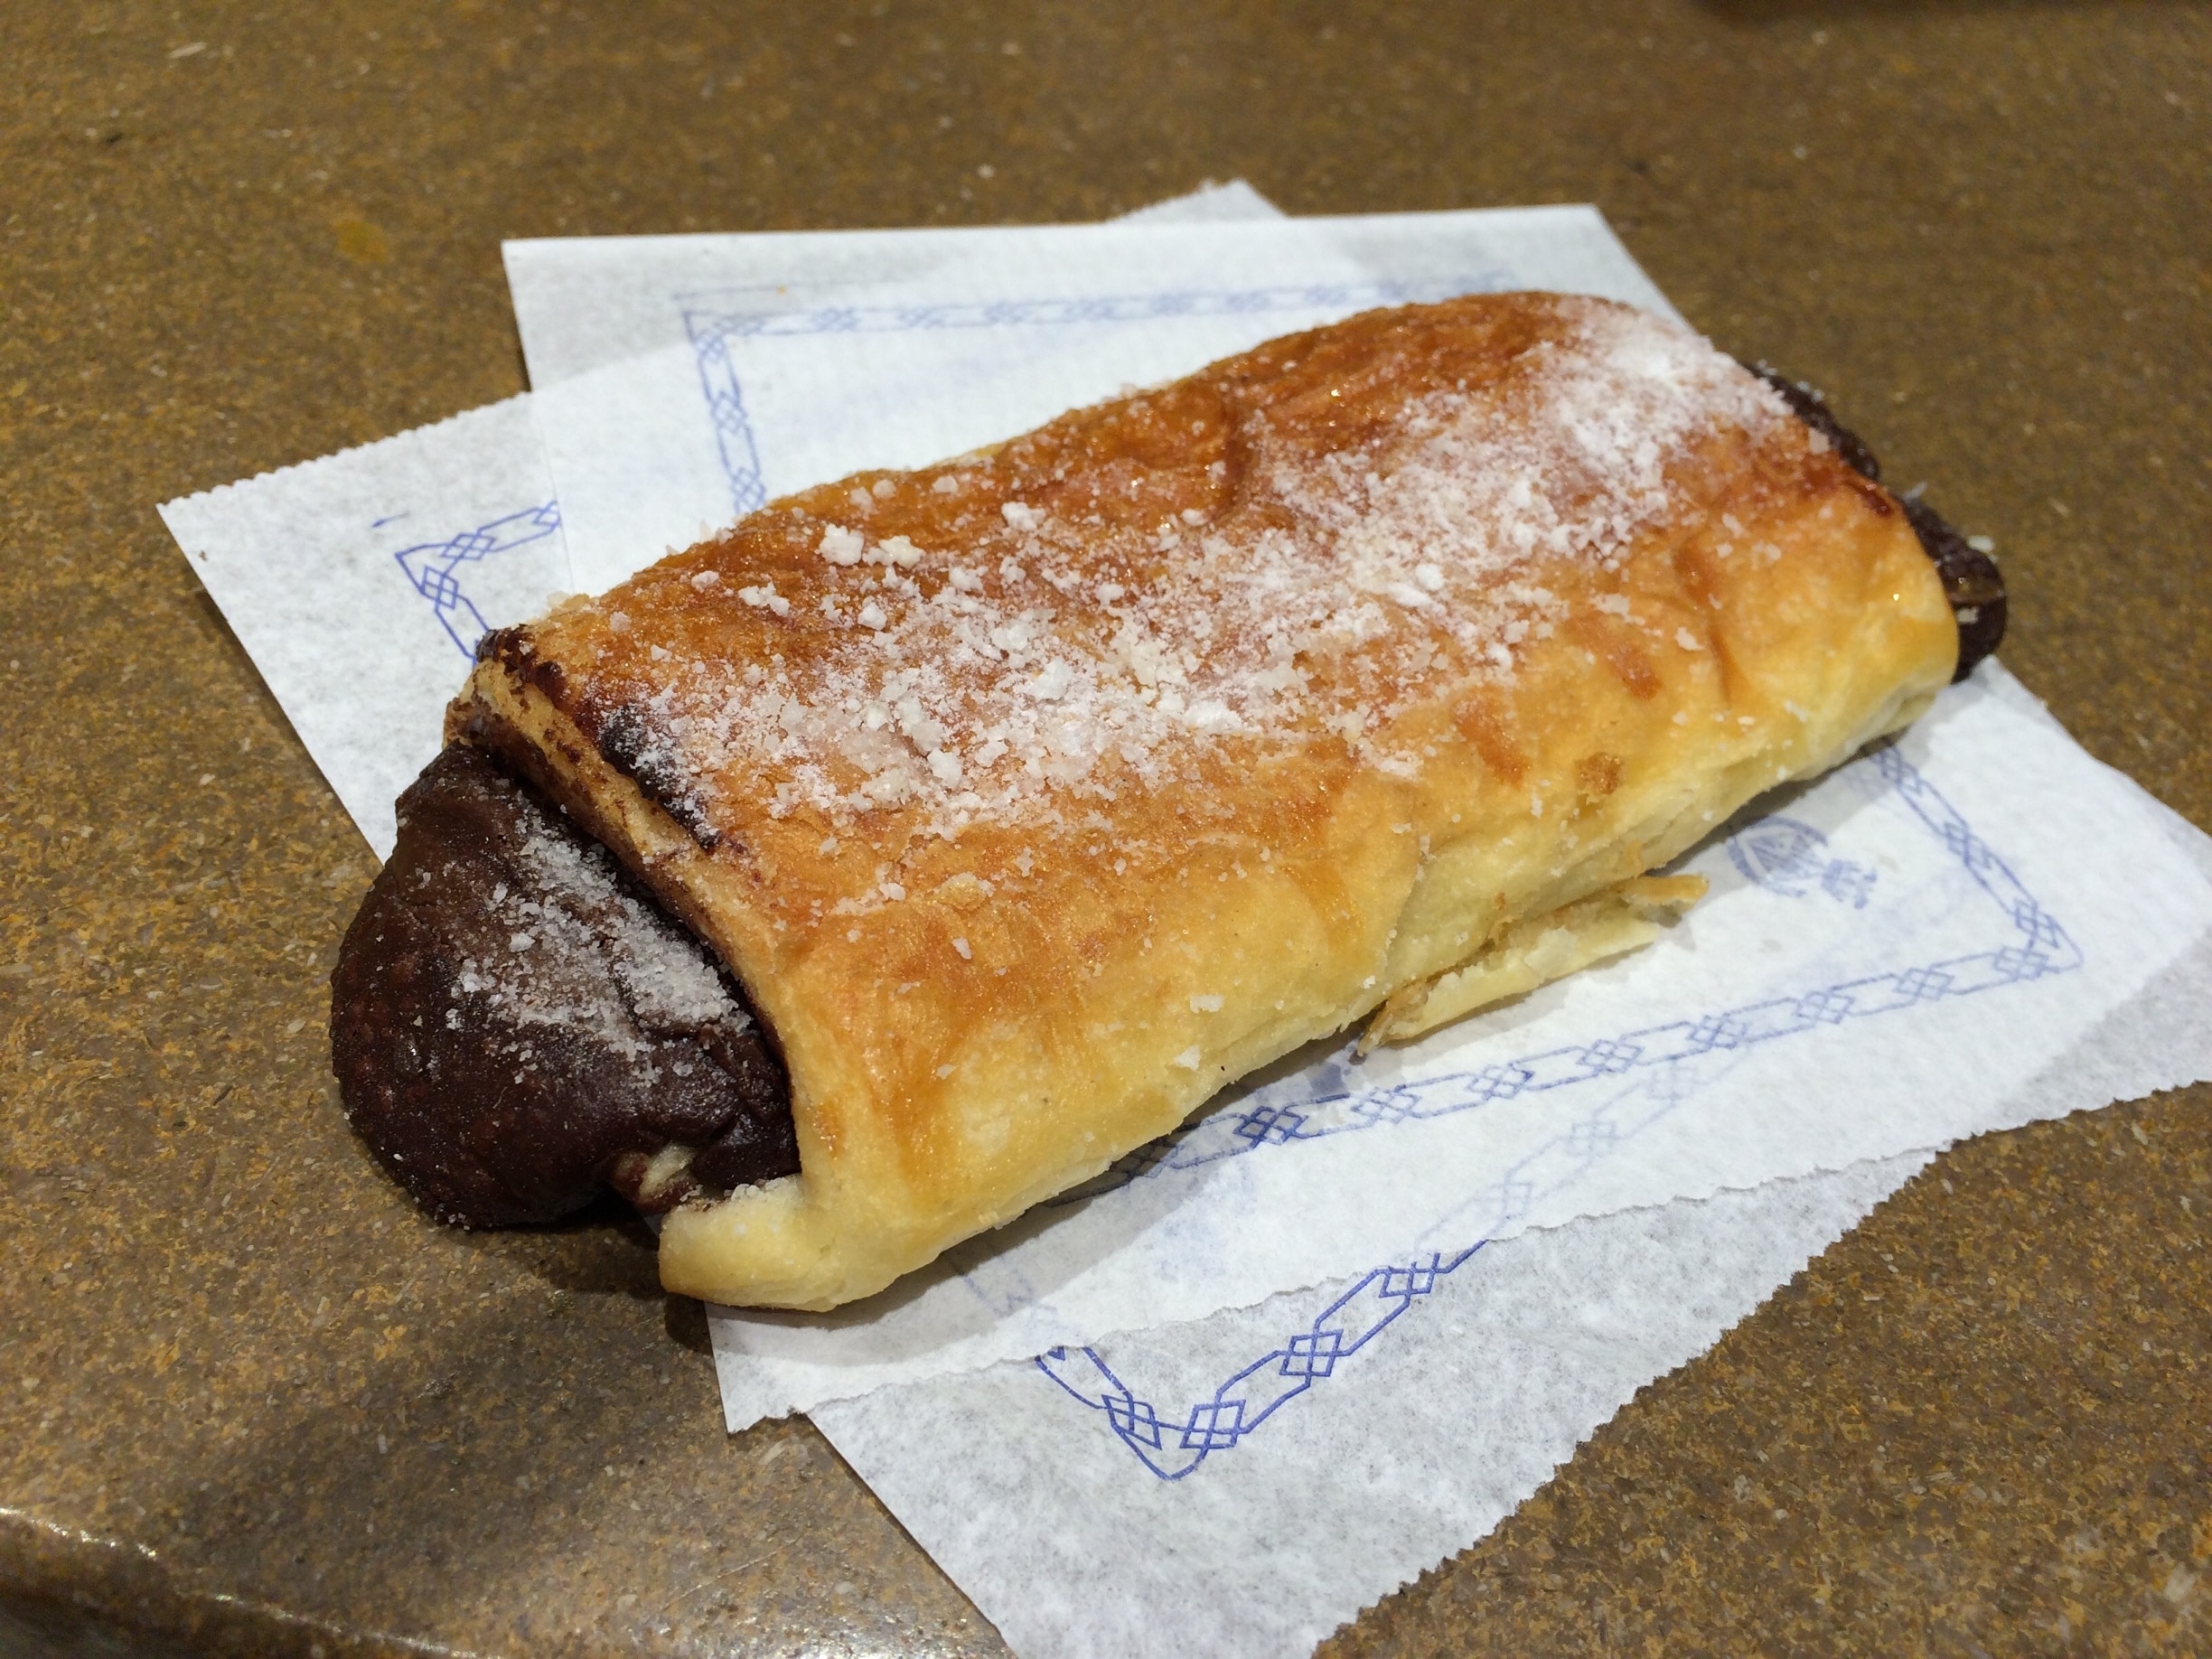 A chocolate napolitana from La Mallorquina in the Puerta del Sol. The chocolate filling is absolutely delicious. A sweet treat I couldn't deny myself. 